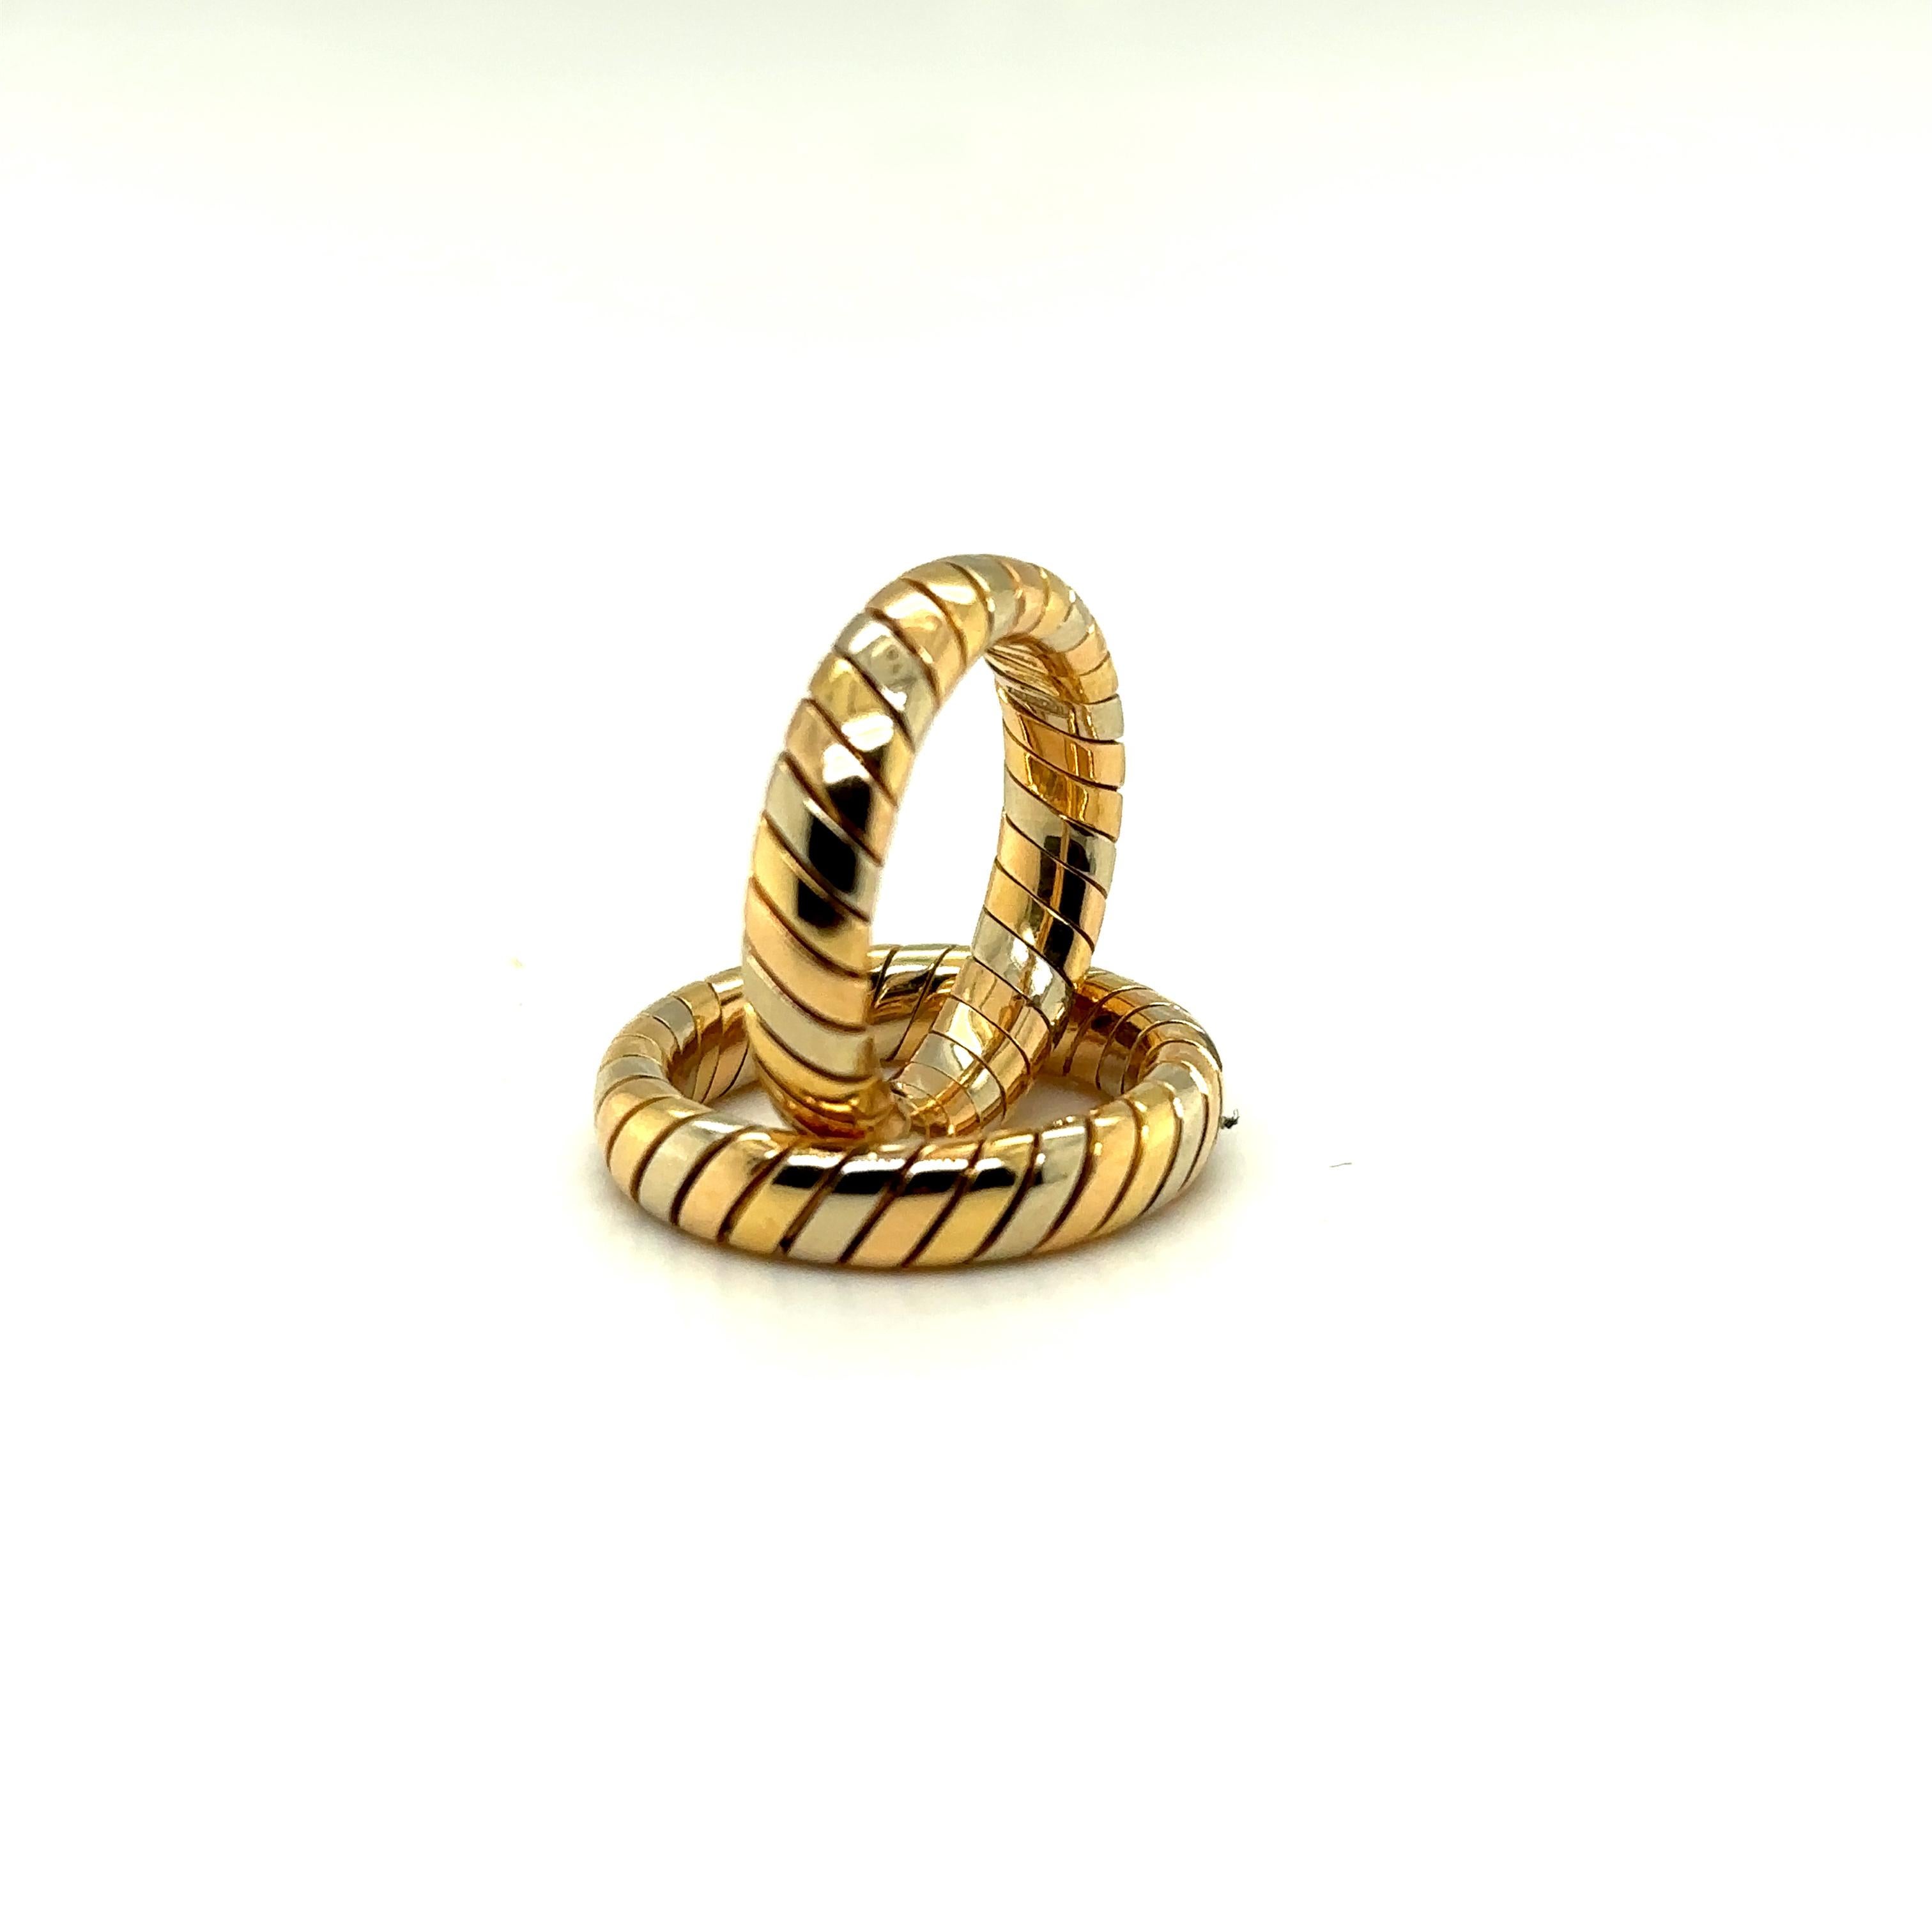 Tubogas style
Of tricolor gold
18k yellow, white, and pink gold
Signed Bulgari
Ring size 5 3/4

